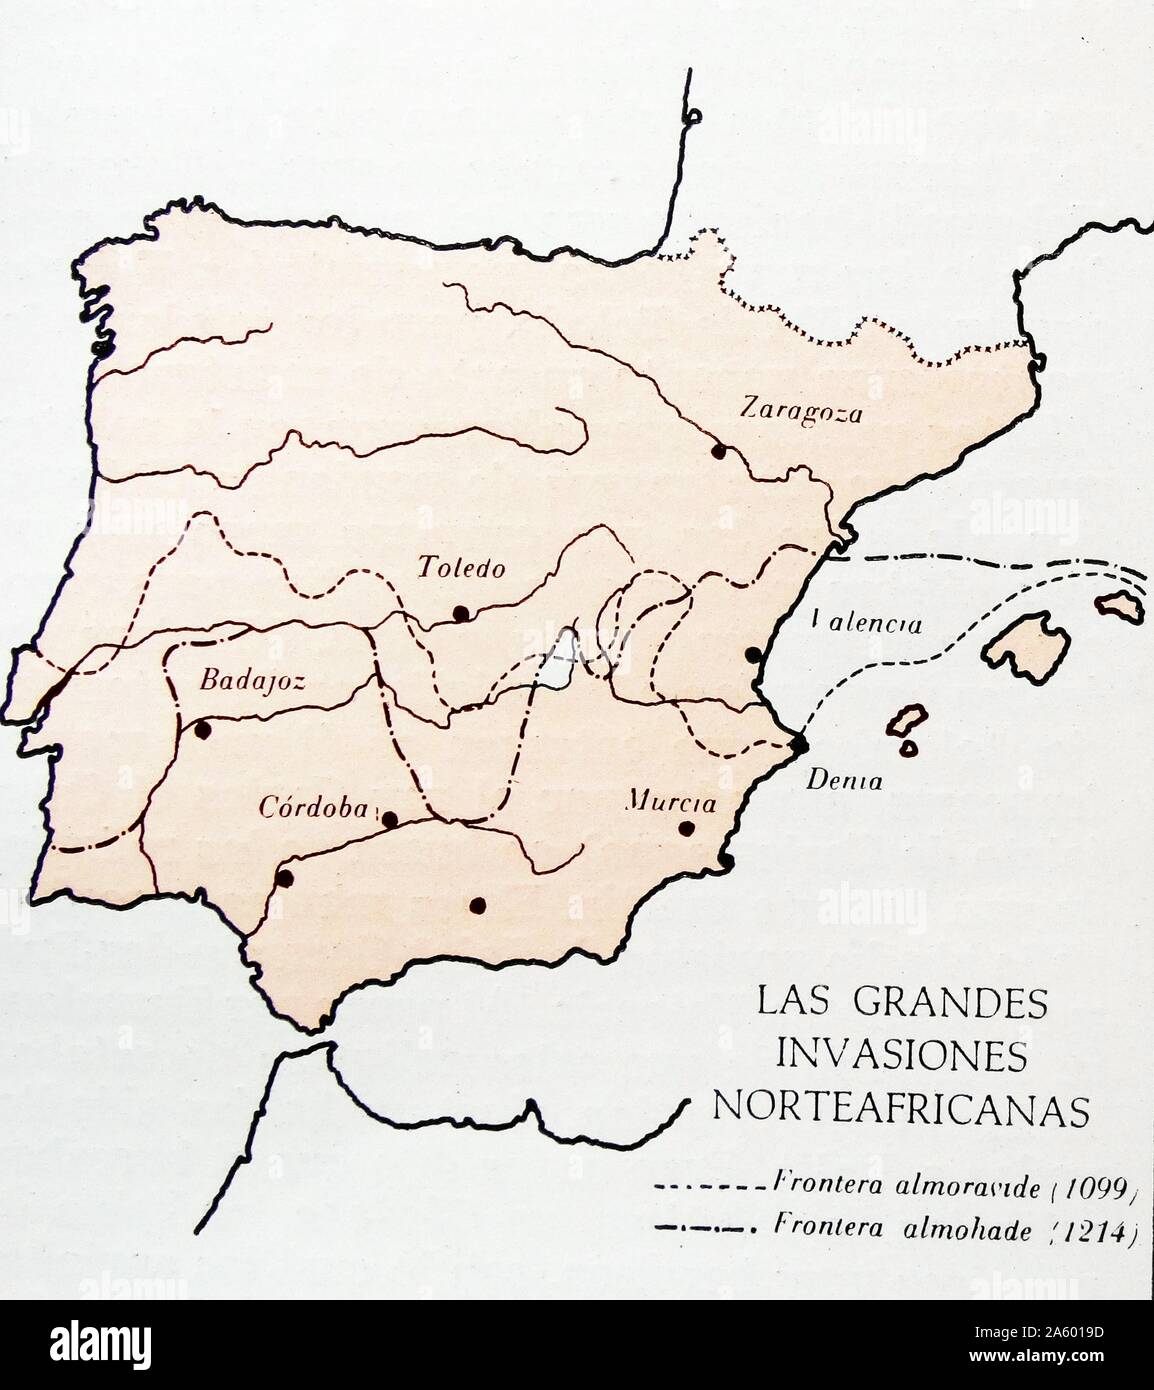 Map showing moslem invasions of Spain between 1099-1214 AD Stock Photo